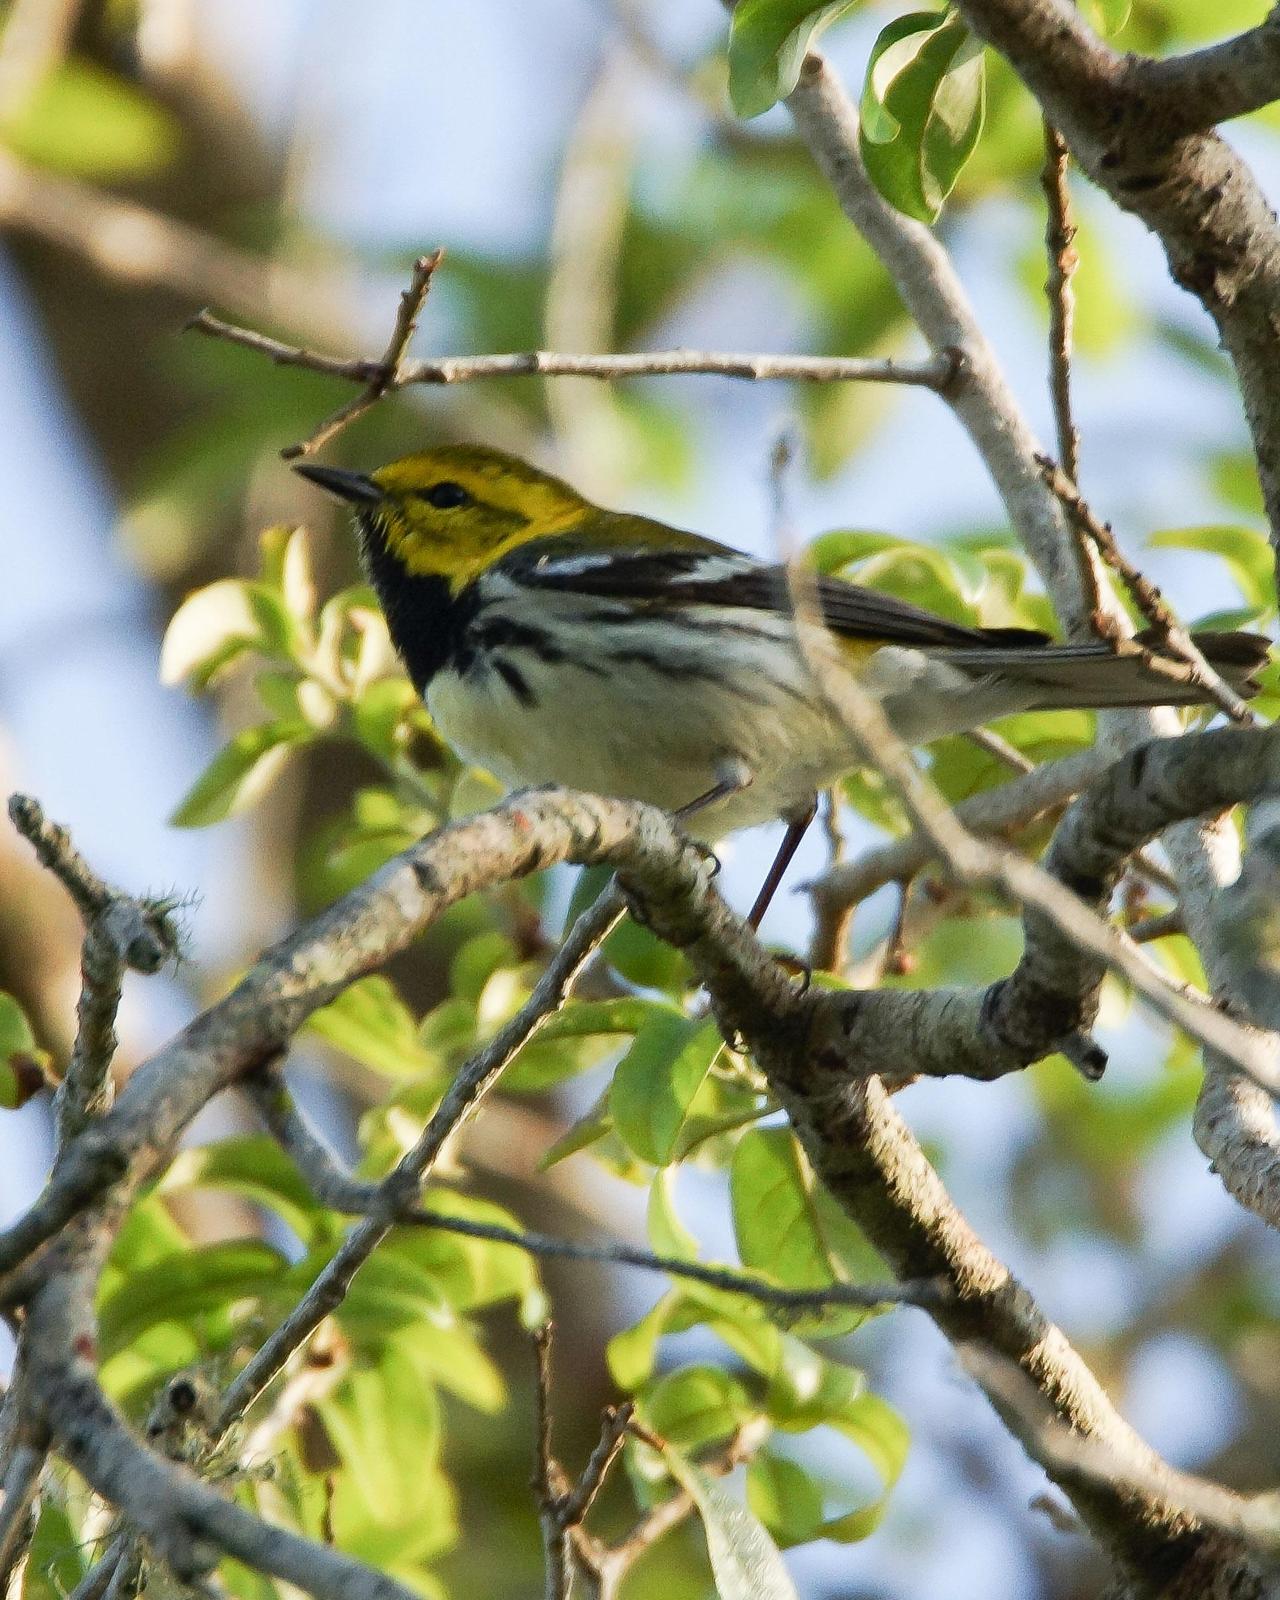 Black-throated Green Warbler Photo by Steve Percival